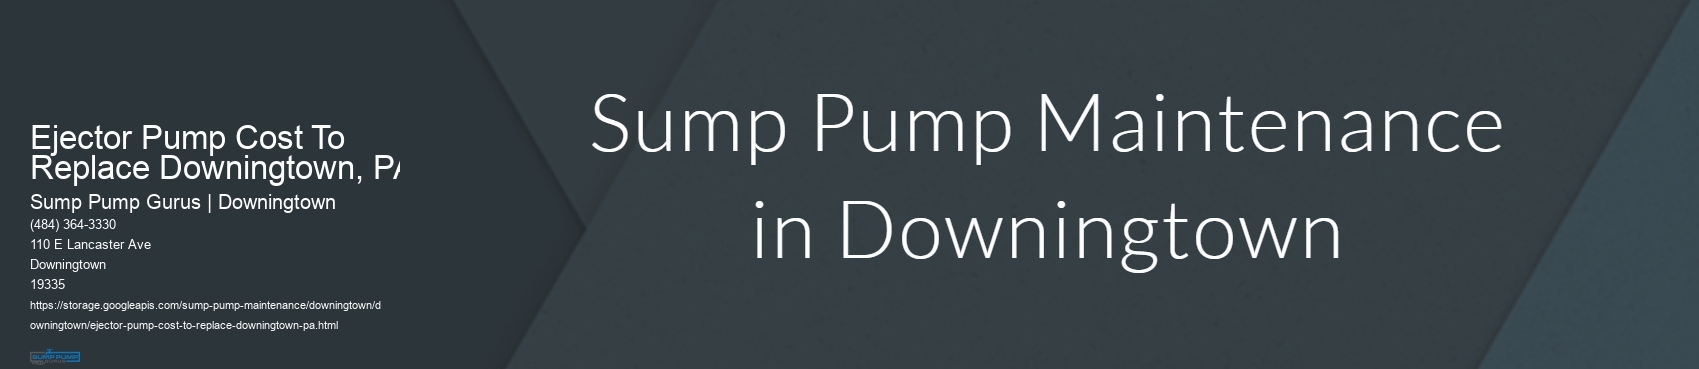 Ejector Pump Cost To Replace Downingtown, PA